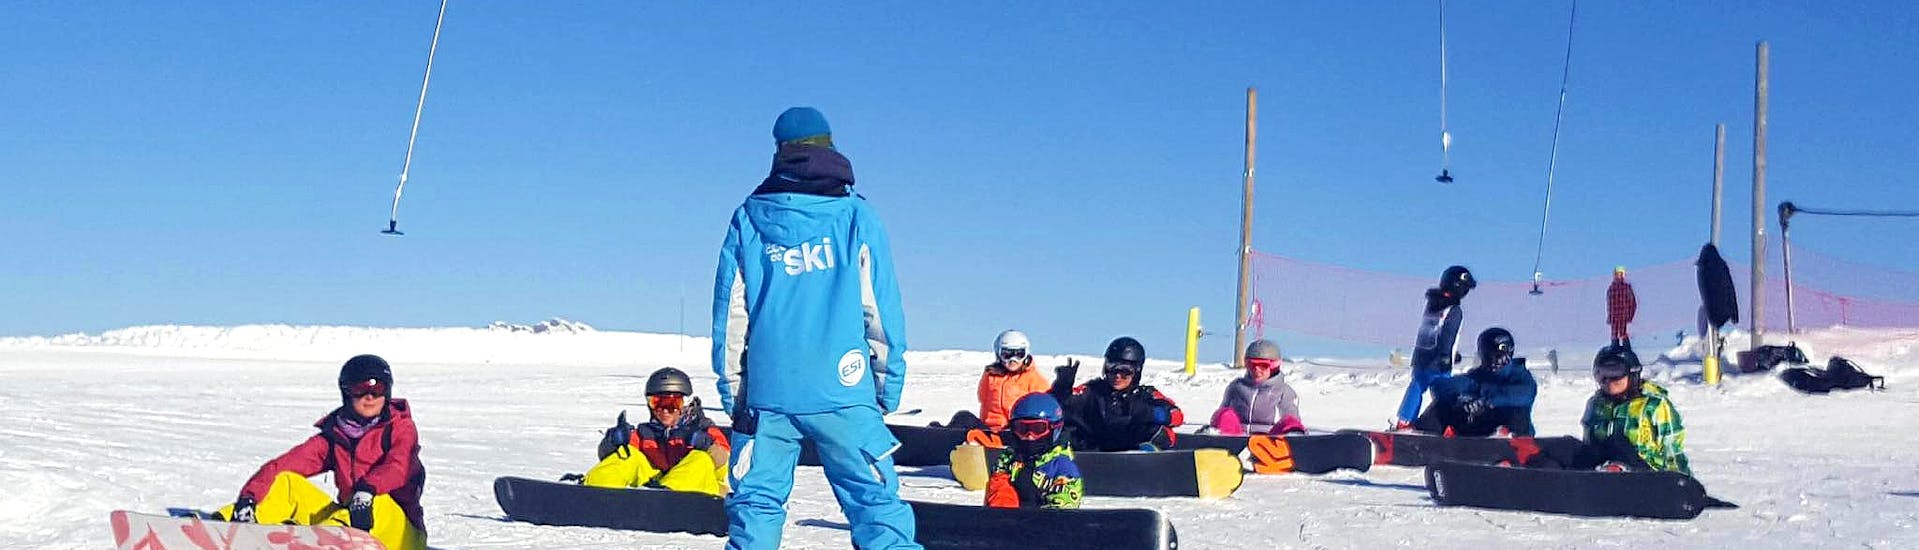 Students are listening attentively to their instructor during their Snowboarding Lessons for Kids & Adults of All Levels with ESI Grand Massif.